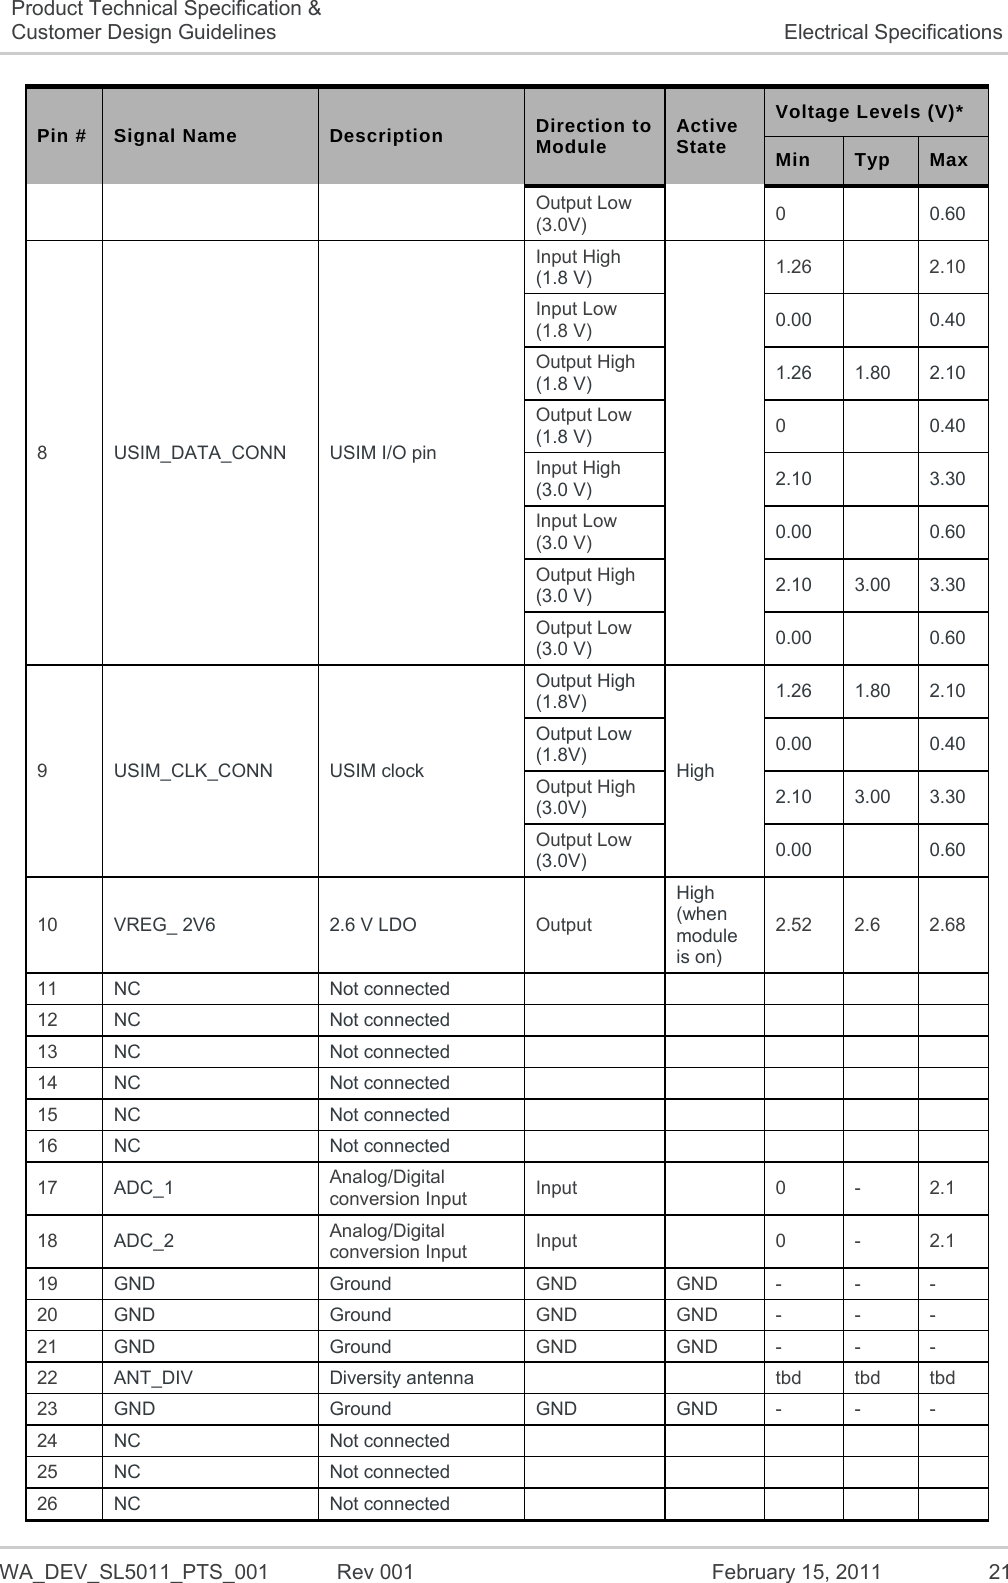   WA_DEV_SL5011_PTS_001  Rev 001  February 15, 2011  21 Product Technical Specification &amp; Customer Design Guidelines  Electrical Specifications Pin #  Signal Name  Description  Direction to Module  Active State Voltage Levels (V)* Min  Typ  Max Output Low (3.0V)  0   0.60 8  USIM_DATA_CONN USIM I/O pin Input High (1.8 V)  1.26   2.10 Input Low (1.8 V)  0.00   0.40 Output High (1.8 V) 1.26 1.80 2.10 Output Low (1.8 V) 0   0.40 Input High (3.0 V) 2.10   3.30 Input Low (3.0 V)  0.00   0.60 Output High (3.0 V) 2.10 3.00 3.30 Output Low (3.0 V) 0.00   0.60 9  USIM_CLK_CONN USIM clock Output High (1.8V) High 1.26 1.80 2.10 Output Low (1.8V) 0.00   0.40 Output High (3.0V) 2.10 3.00 3.30 Output Low (3.0V) 0.00   0.60 10  VREG_ 2V6 2.6 V LDO Output High (when module is on) 2.52 2.6  2.68 11  NC Not connected        12  NC Not connected        13  NC Not connected        14  NC Not connected        15  NC   Not connected        16  NC   Not connected        17  ADC_1 Analog/Digital conversion Input  Input  0 - 2.1 18  ADC_2 Analog/Digital conversion Input  Input  0 - 2.1 19  GND  Ground   GND  GND  -  -  - 20  GND  Ground   GND  GND  -  -  - 21  GND  Ground   GND  GND  -  -  - 22  ANT_DIV Diversity antenna     tbd tbd tbd 23  GND Ground GND GND -  -  - 24  NC Not connected        25  NC Not connected        26  NC Not connected        